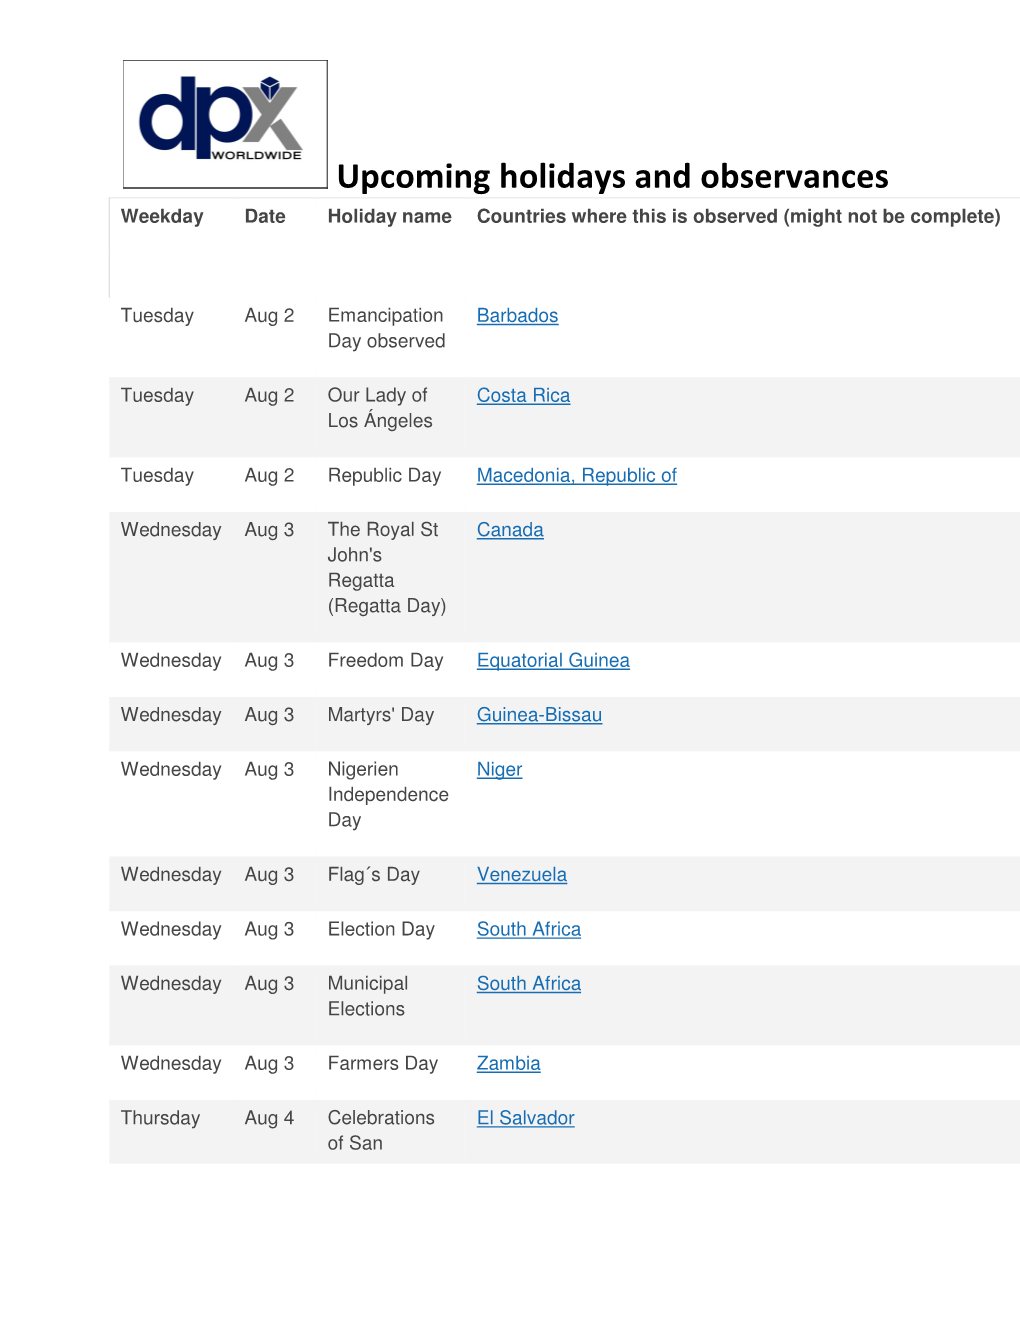 Upcoming Holidays and Observances Weekday Date Holiday Name Countries Where This Is Observed (Might Not Be Complete)